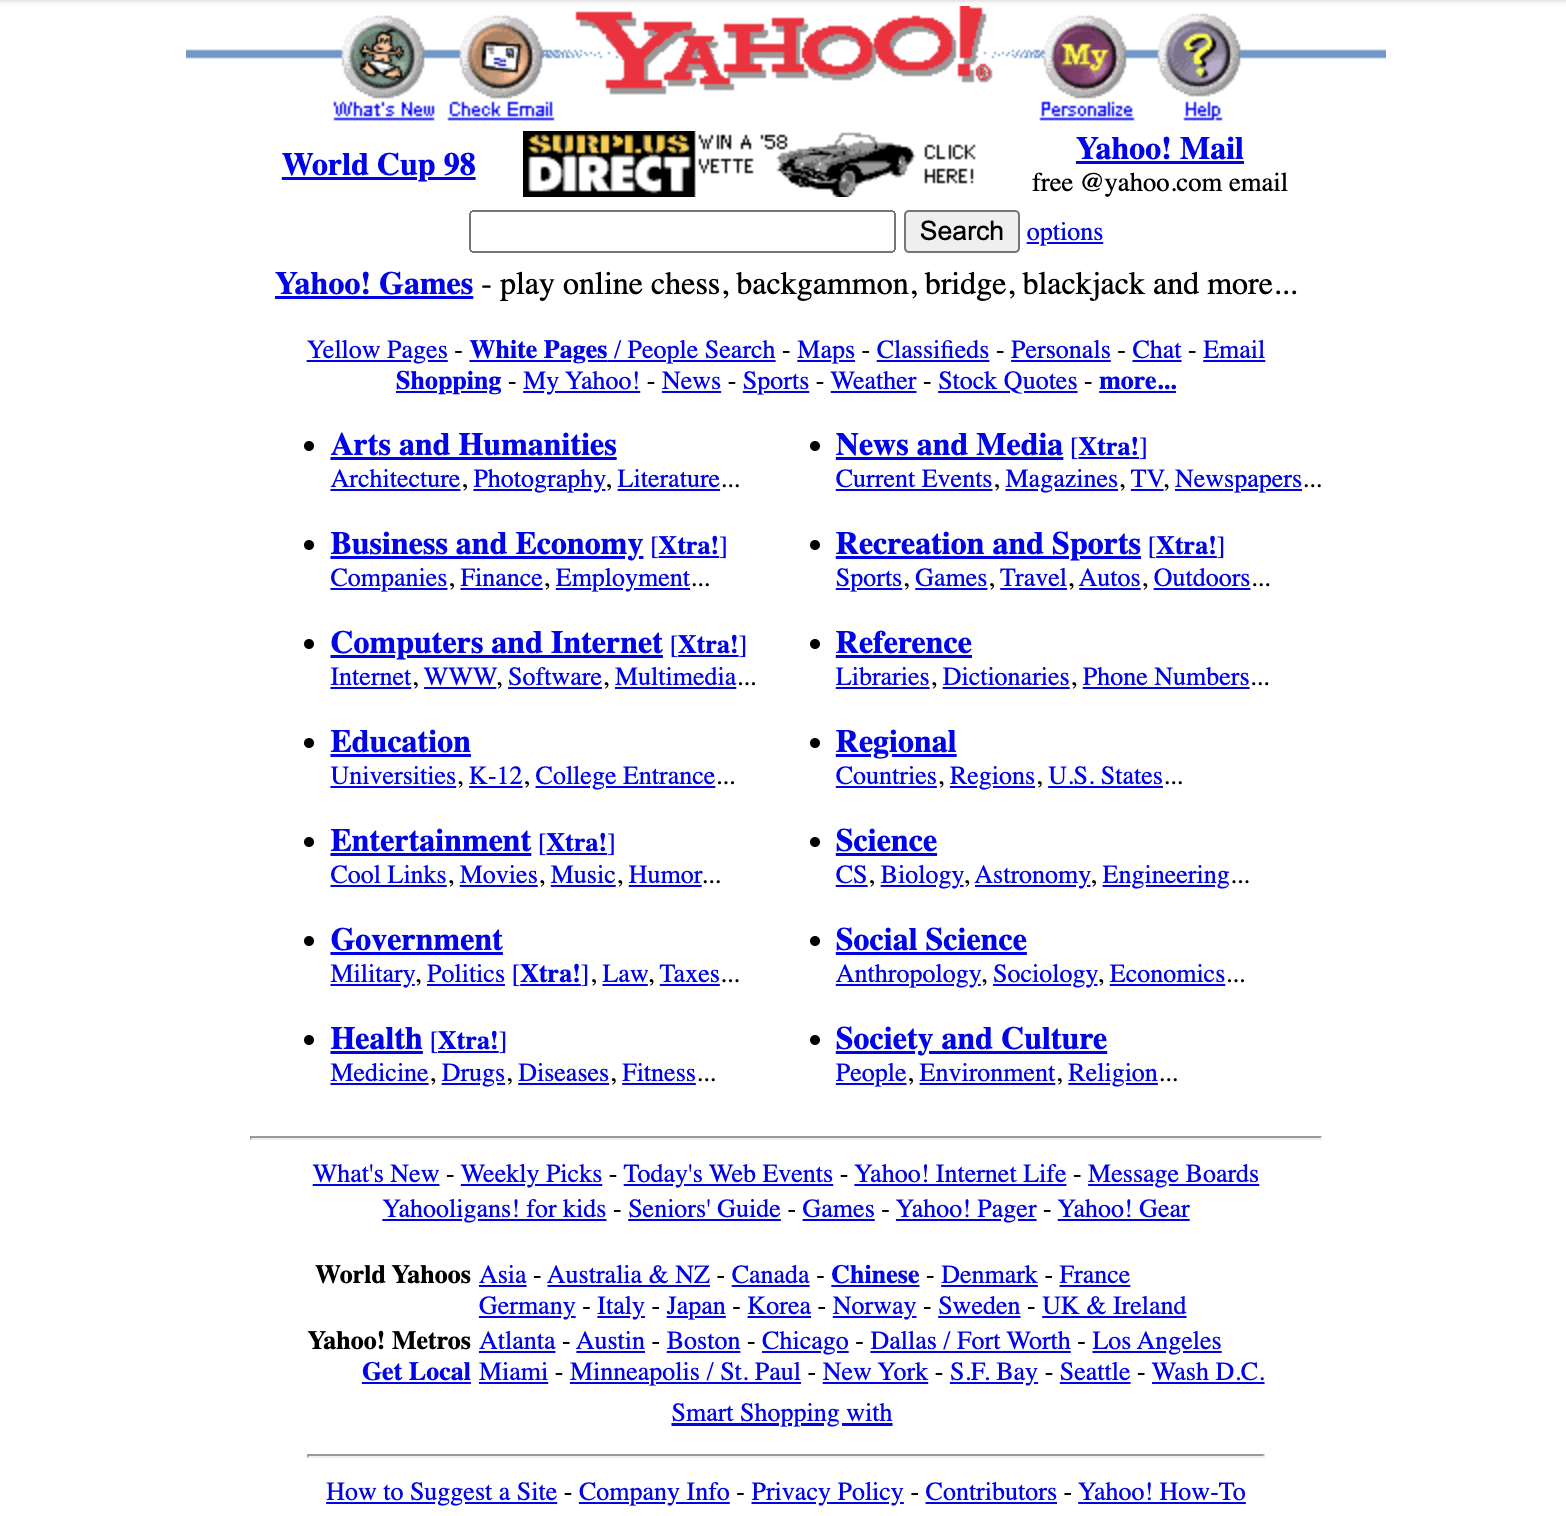 Screenshot of an earlier version of the Yahoo! front page. Credit - The Wayback Machine